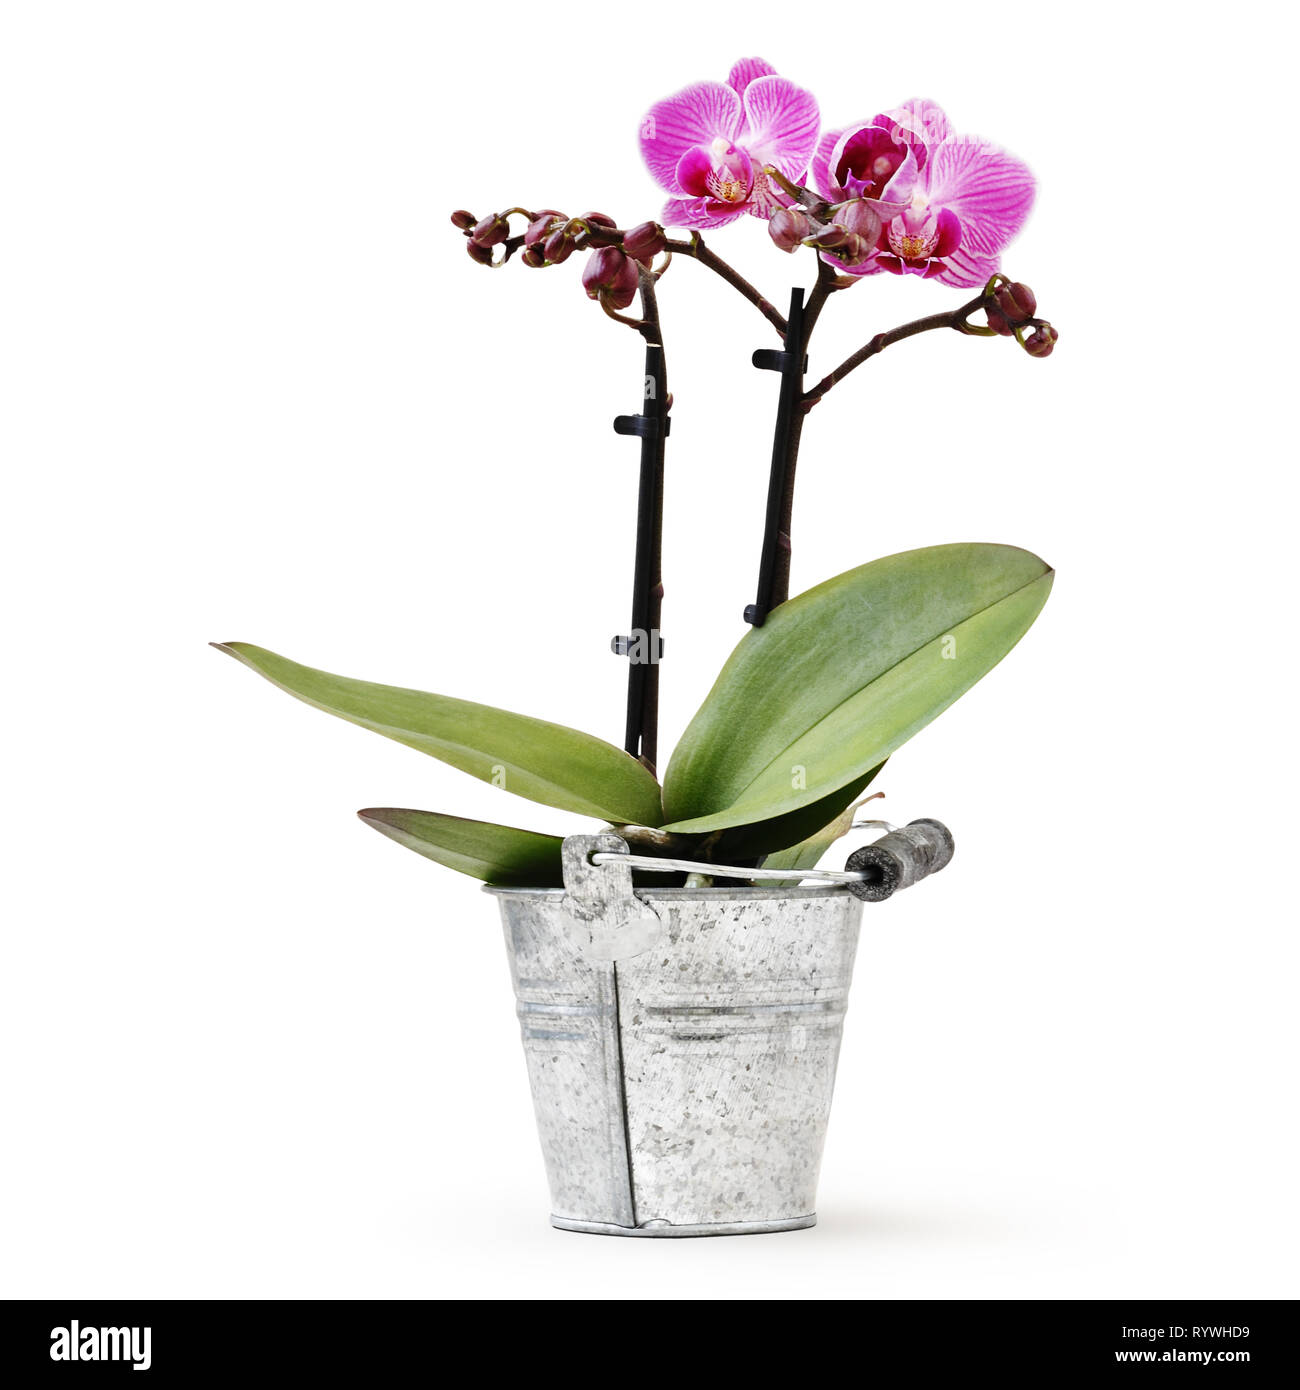 orchid flower plant in pot metal bucket isolated on white background, florist shop or gift card present concept Stock Photo